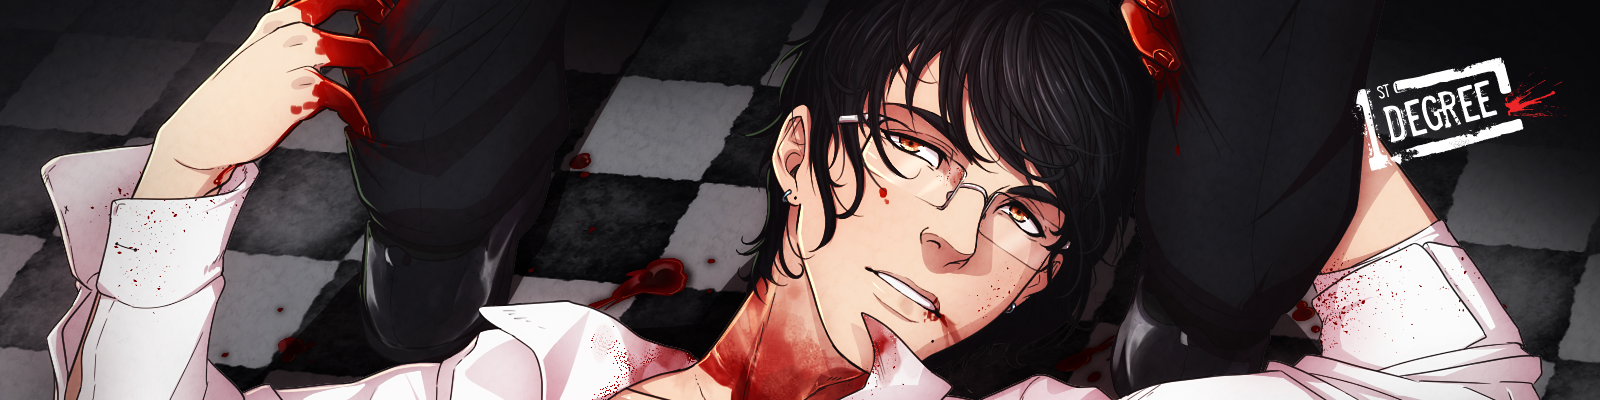 1st Degree: Murder-Mystery BL/Yaoi VN [UPDATED DEMO]